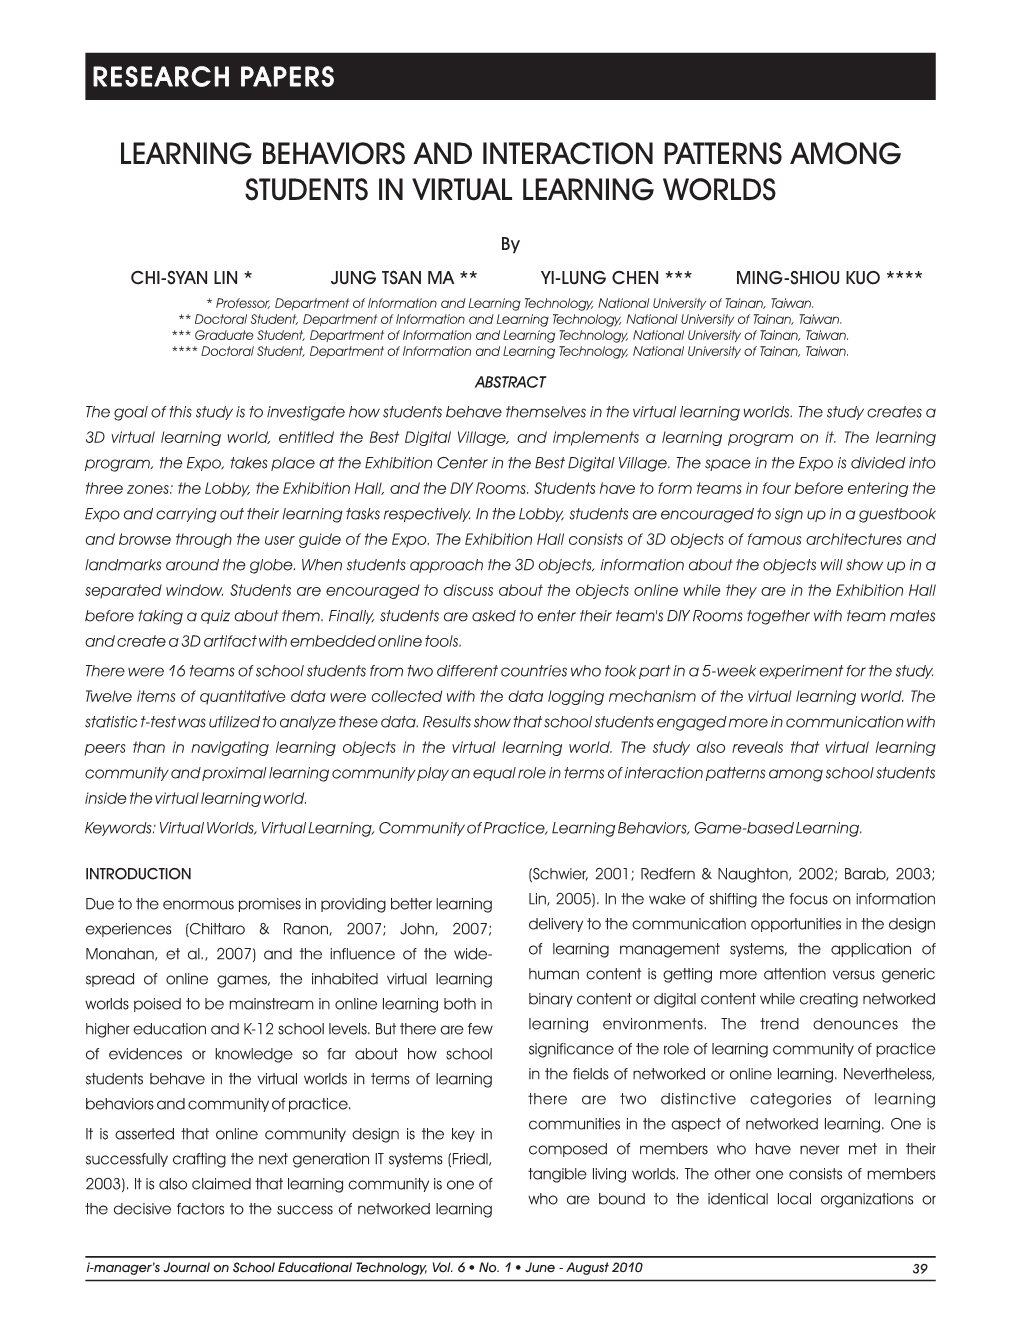 Learning Behaviors and Interaction Patterns Among Students in Virtual Learning Worlds